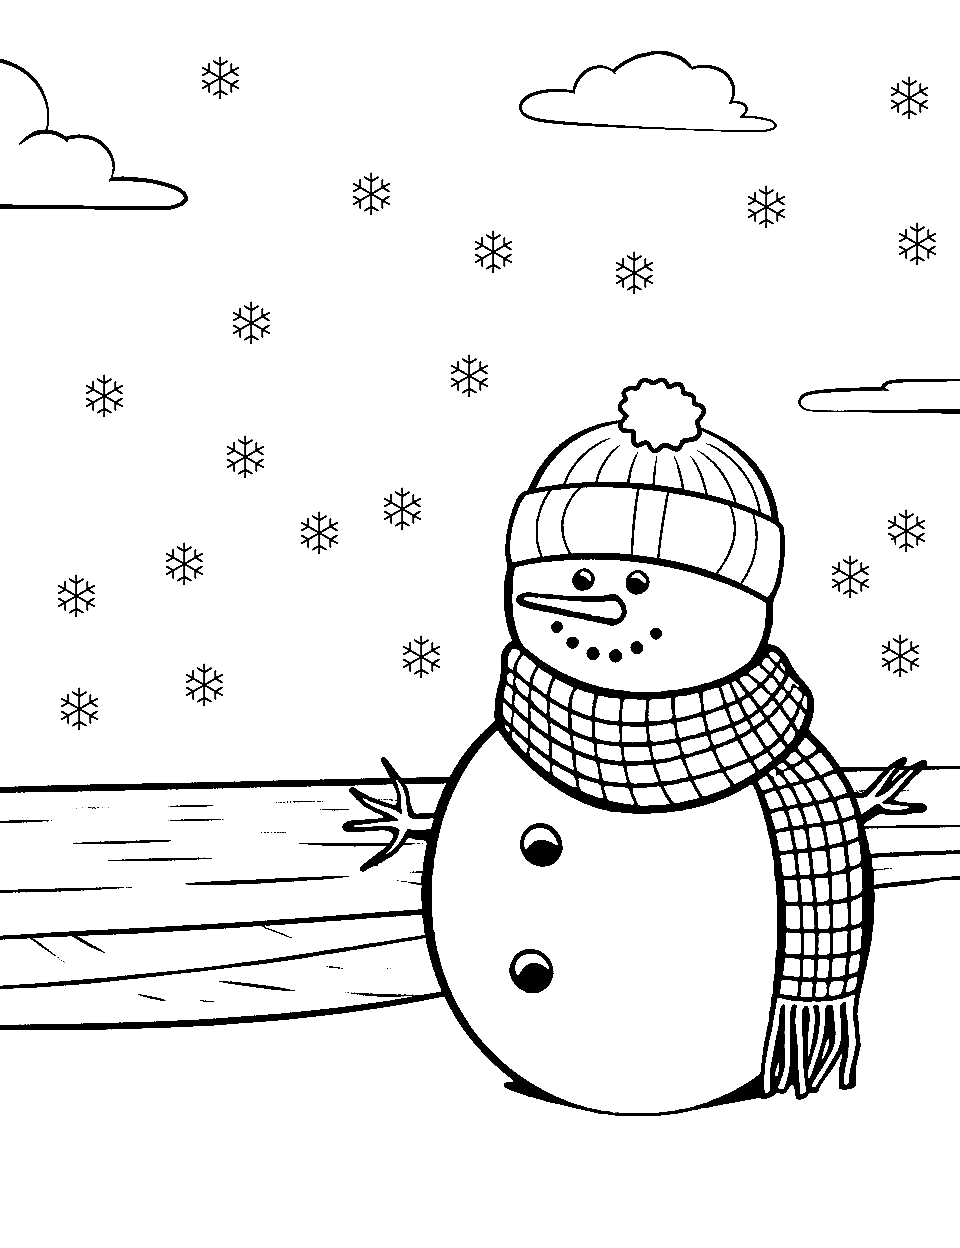 Snowman at the Beach Coloring Page - A snowman on a snowy beach.